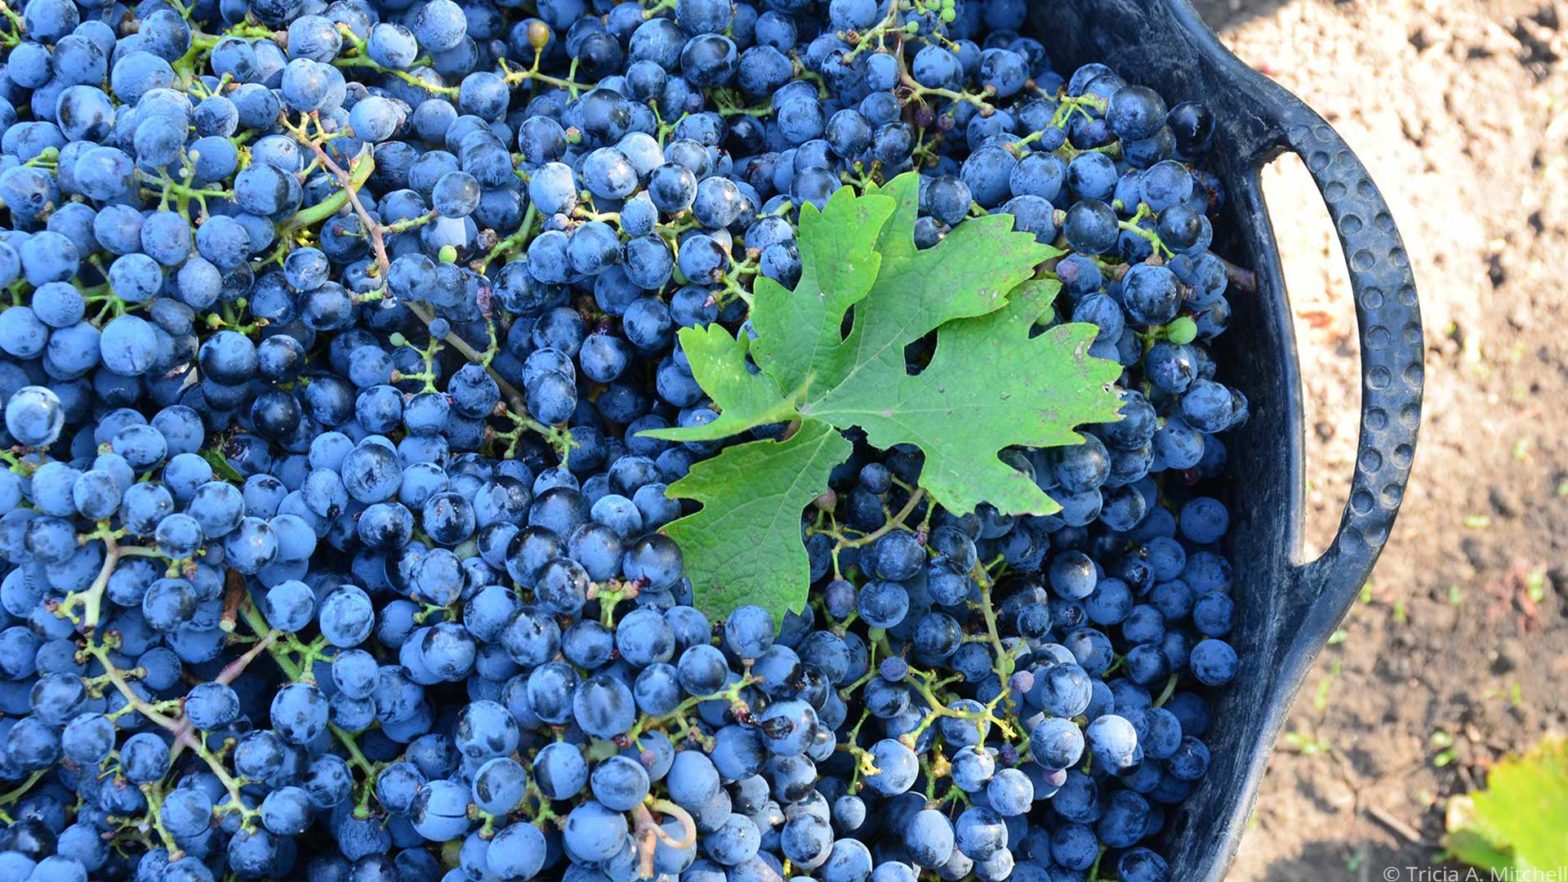 A basket of blue grapes in Moldova.